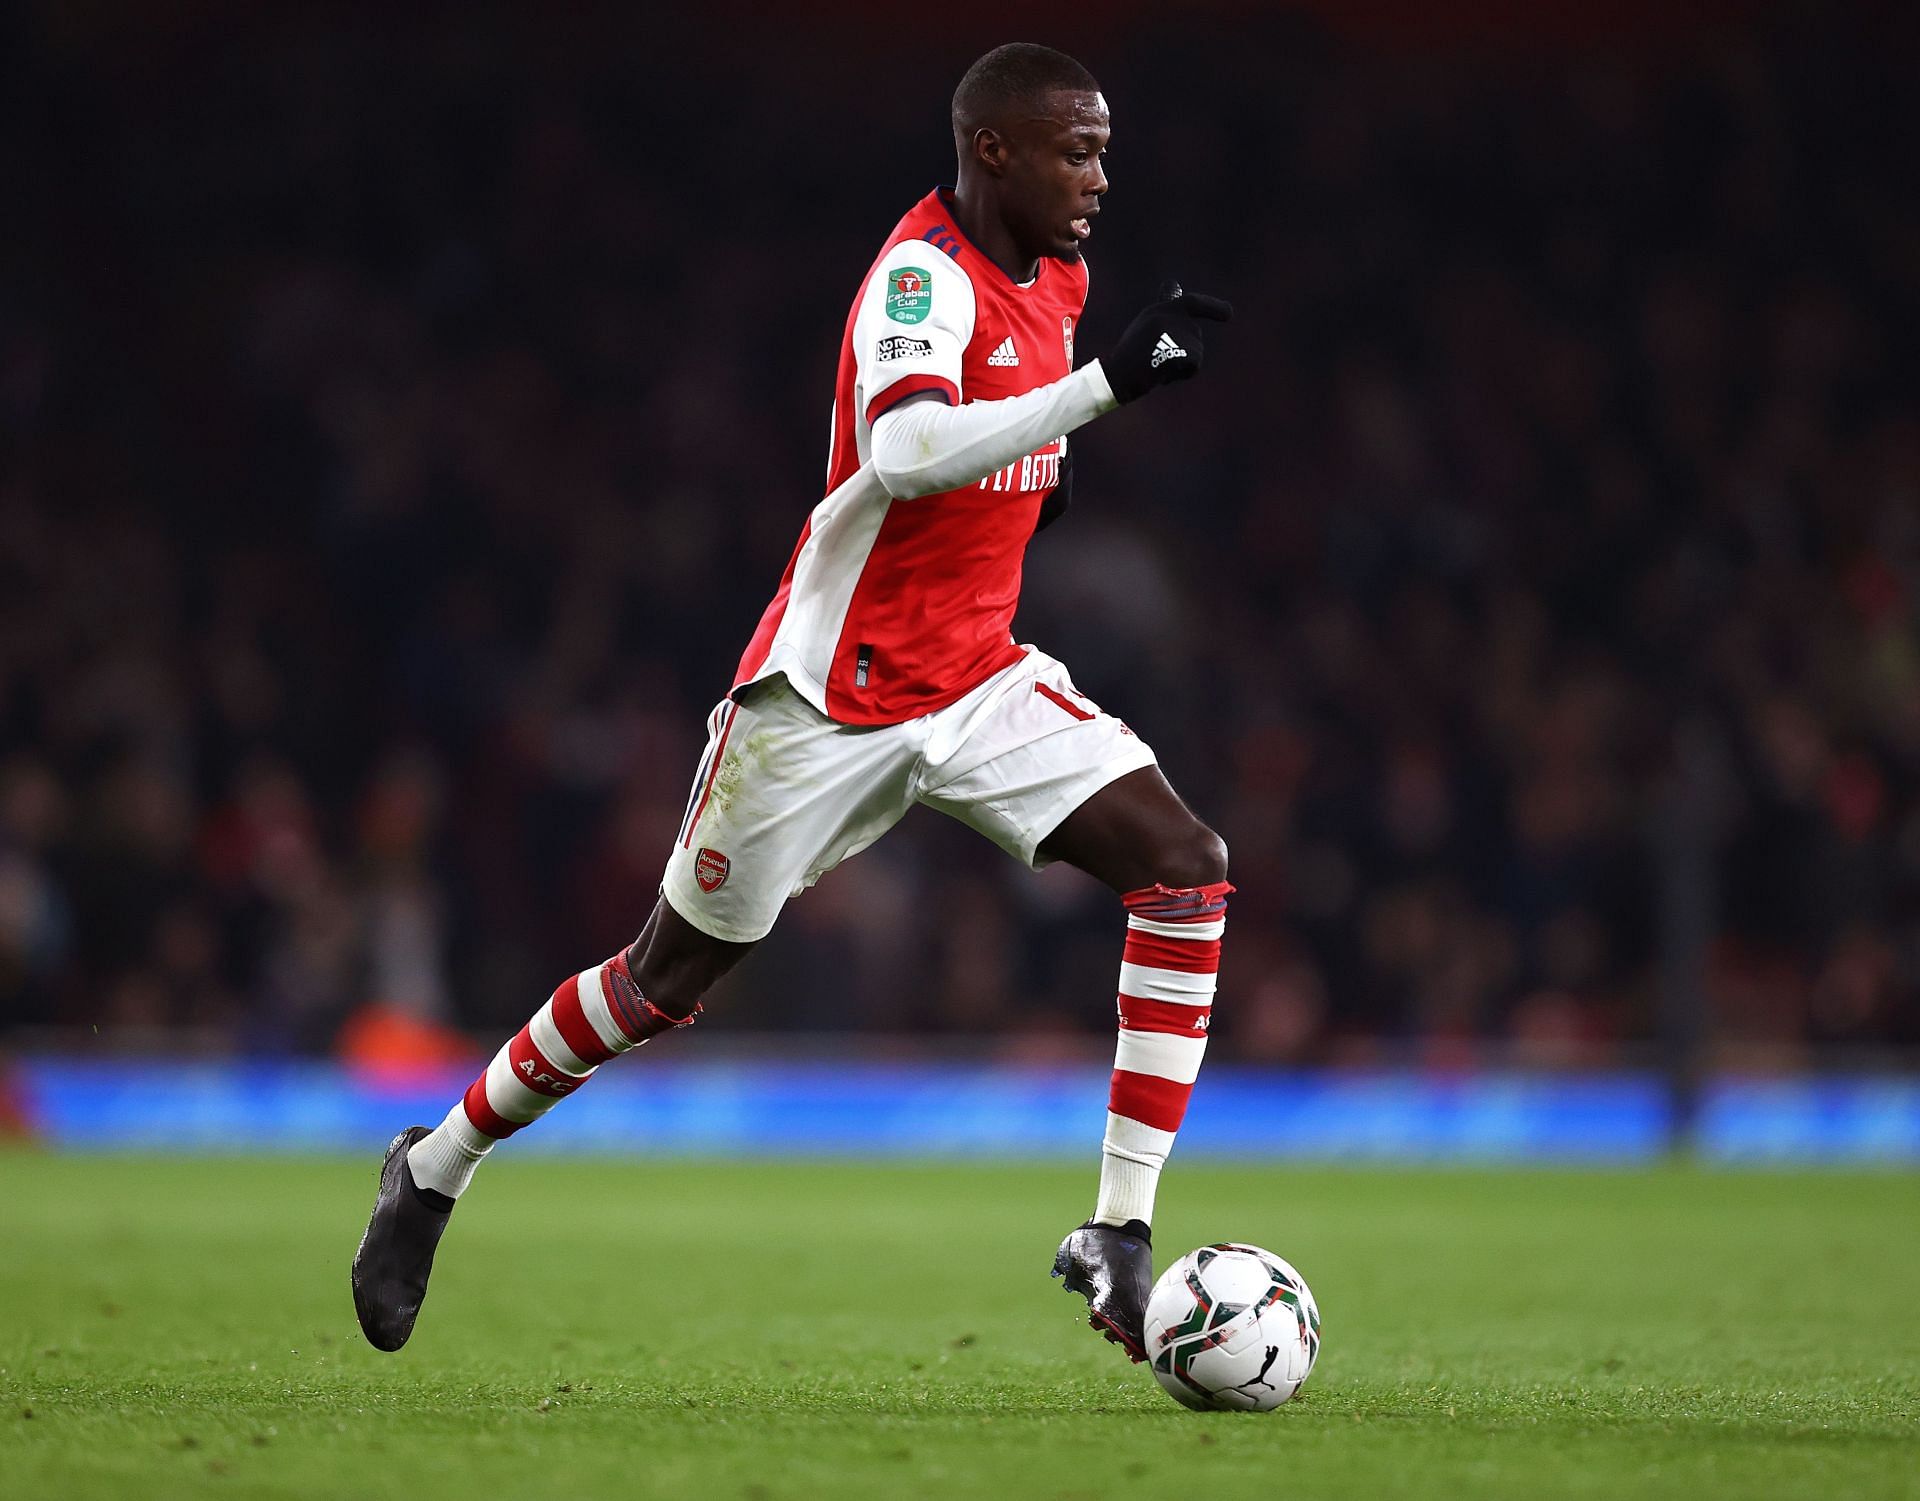 Nicolas Pepe playing for the Gunners (via Getty Images)